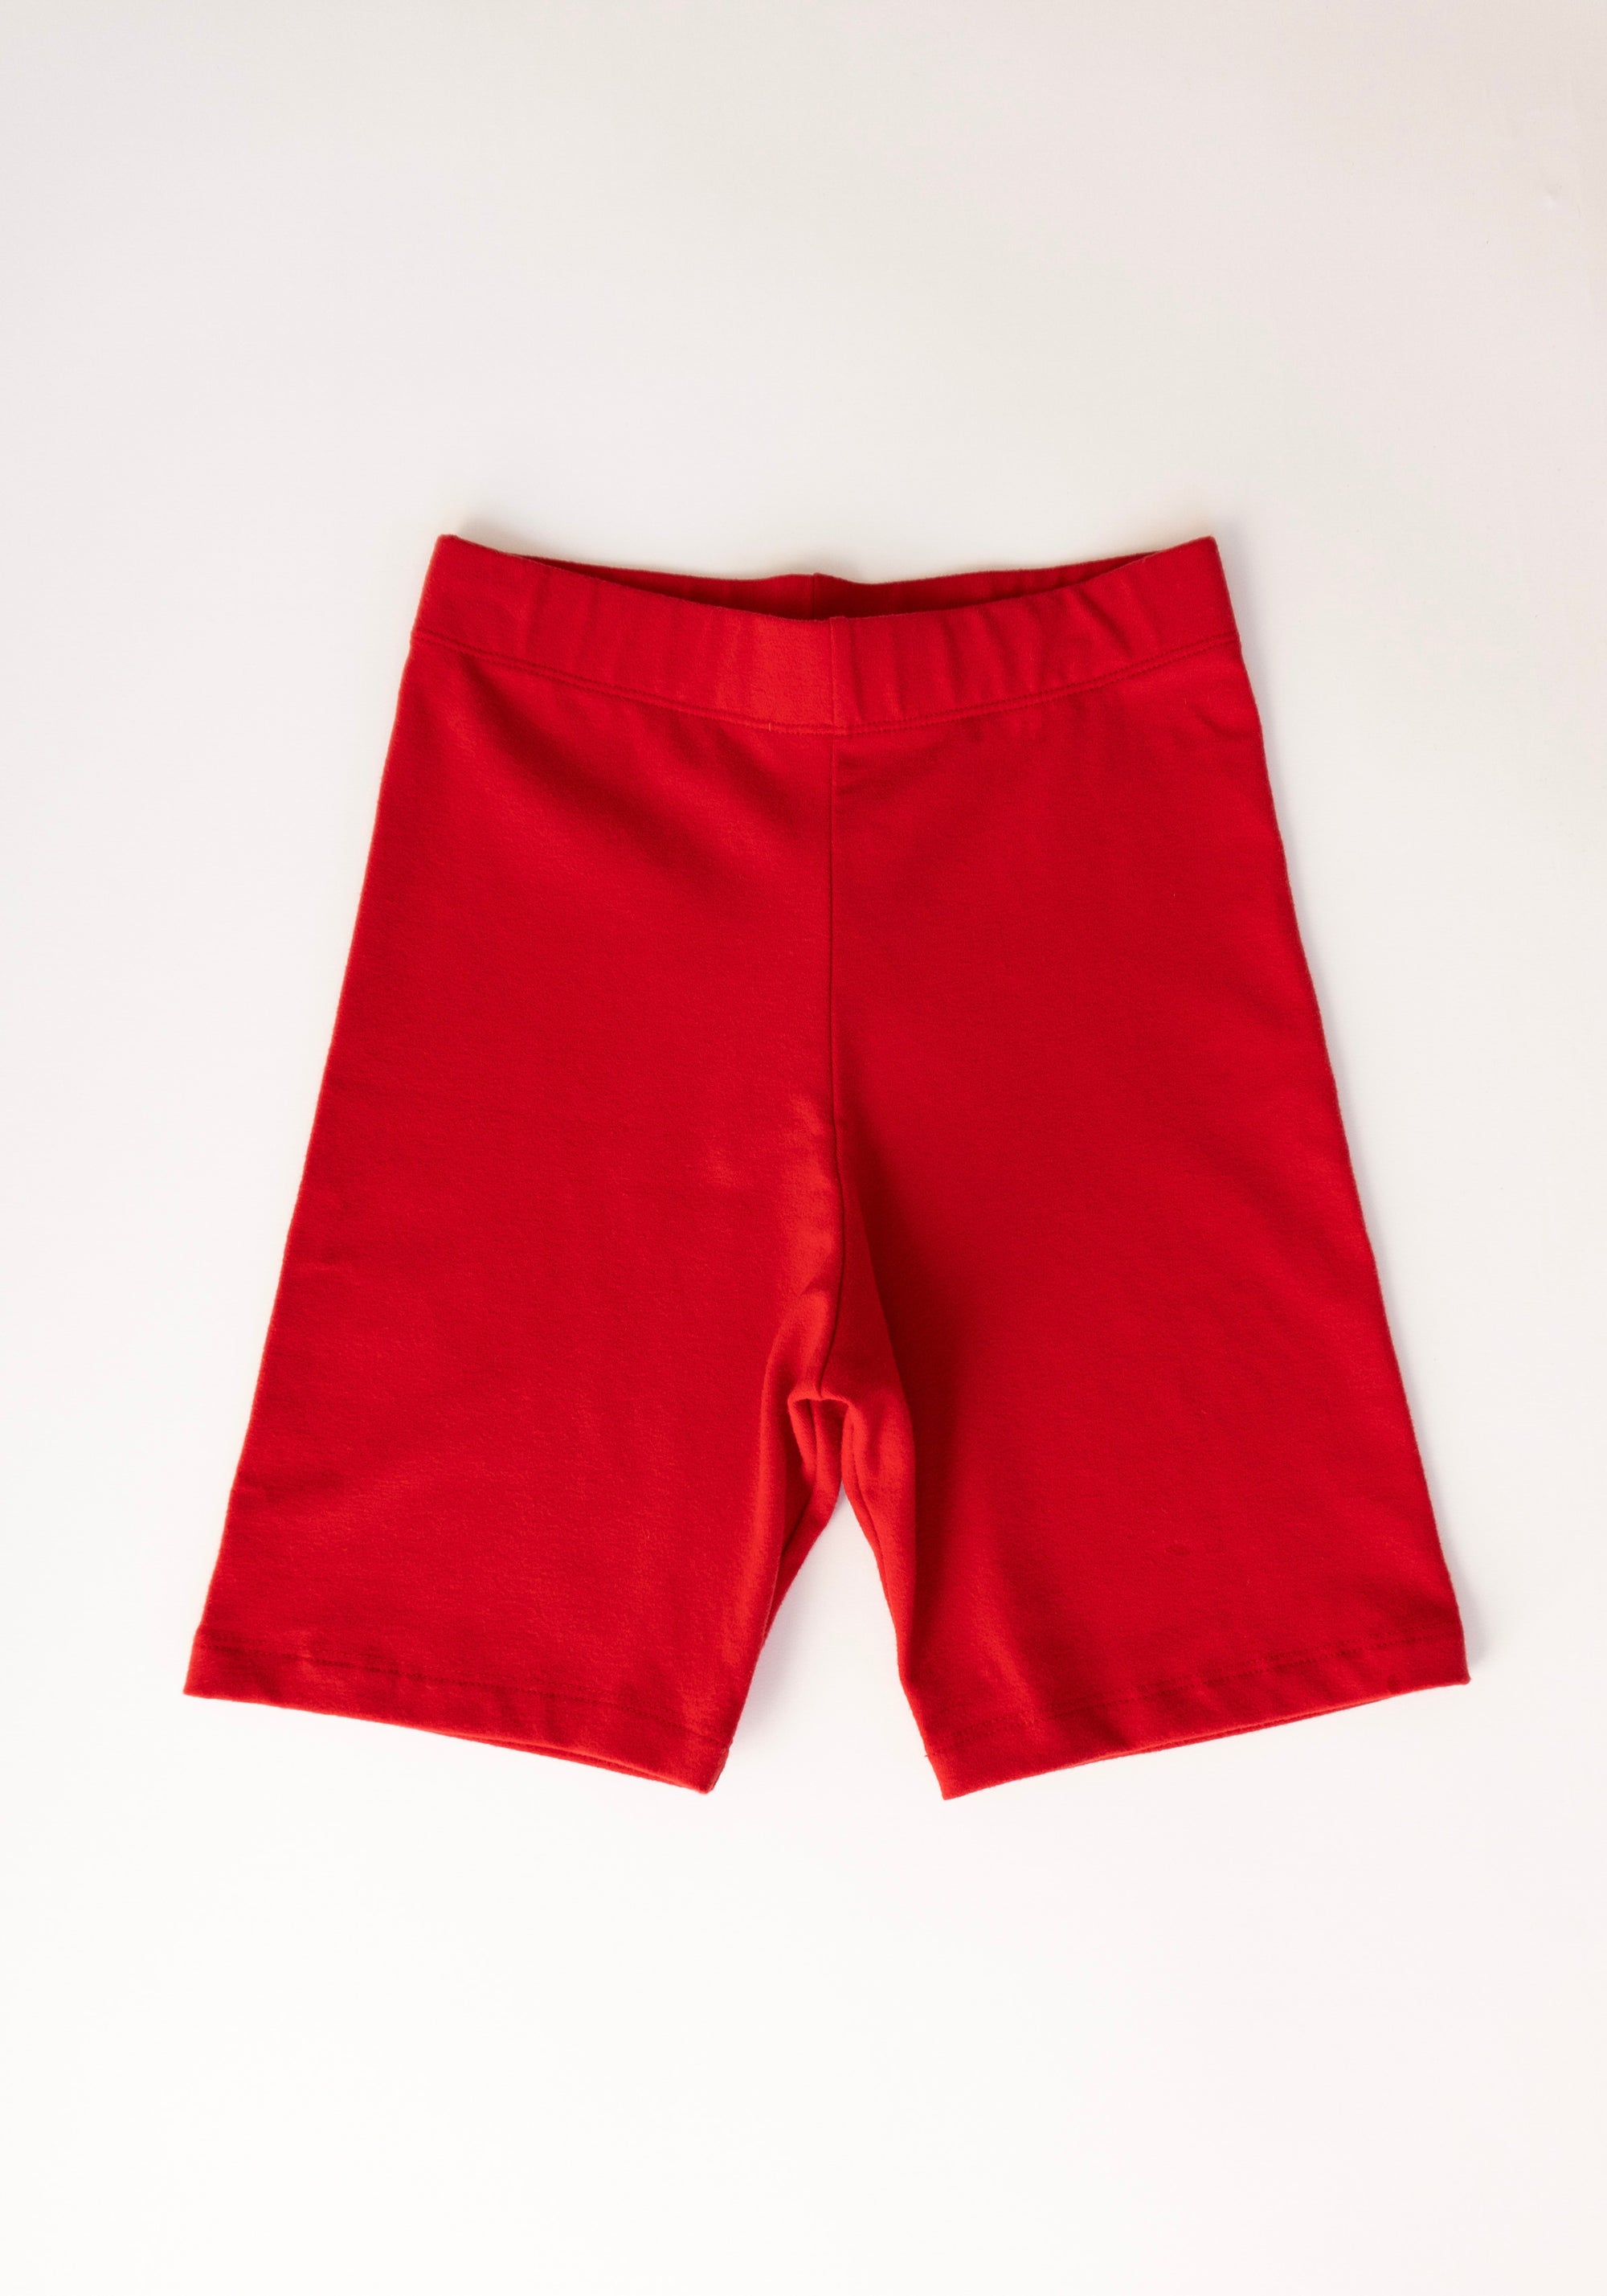 Tour de France Shorts in Red